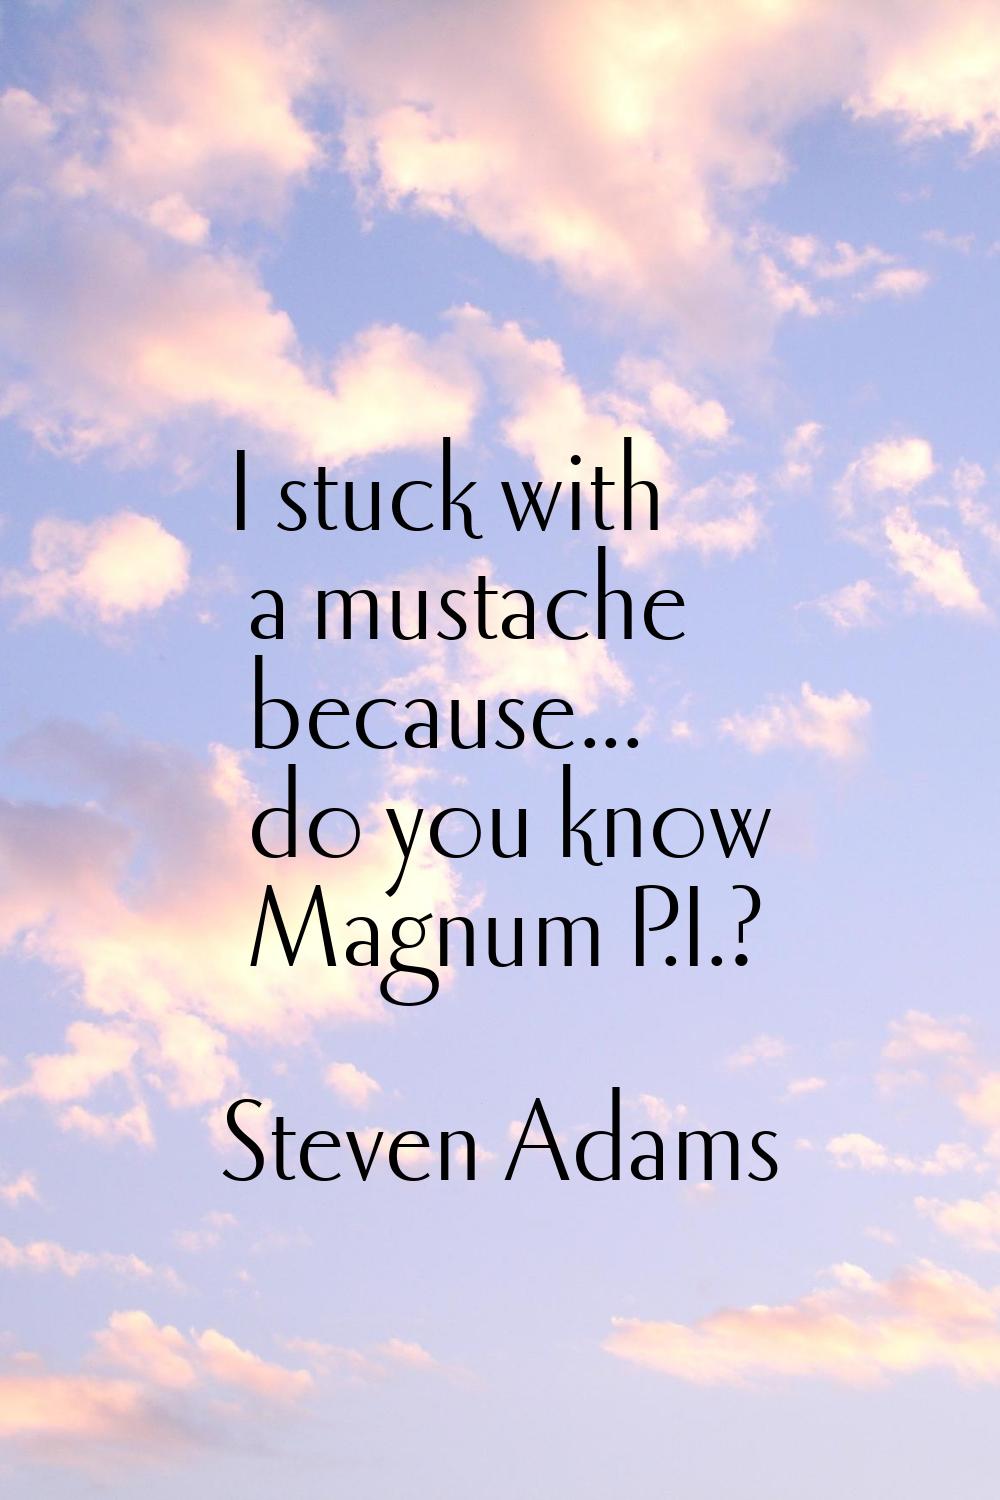 I stuck with a mustache because... do you know Magnum P.I.?